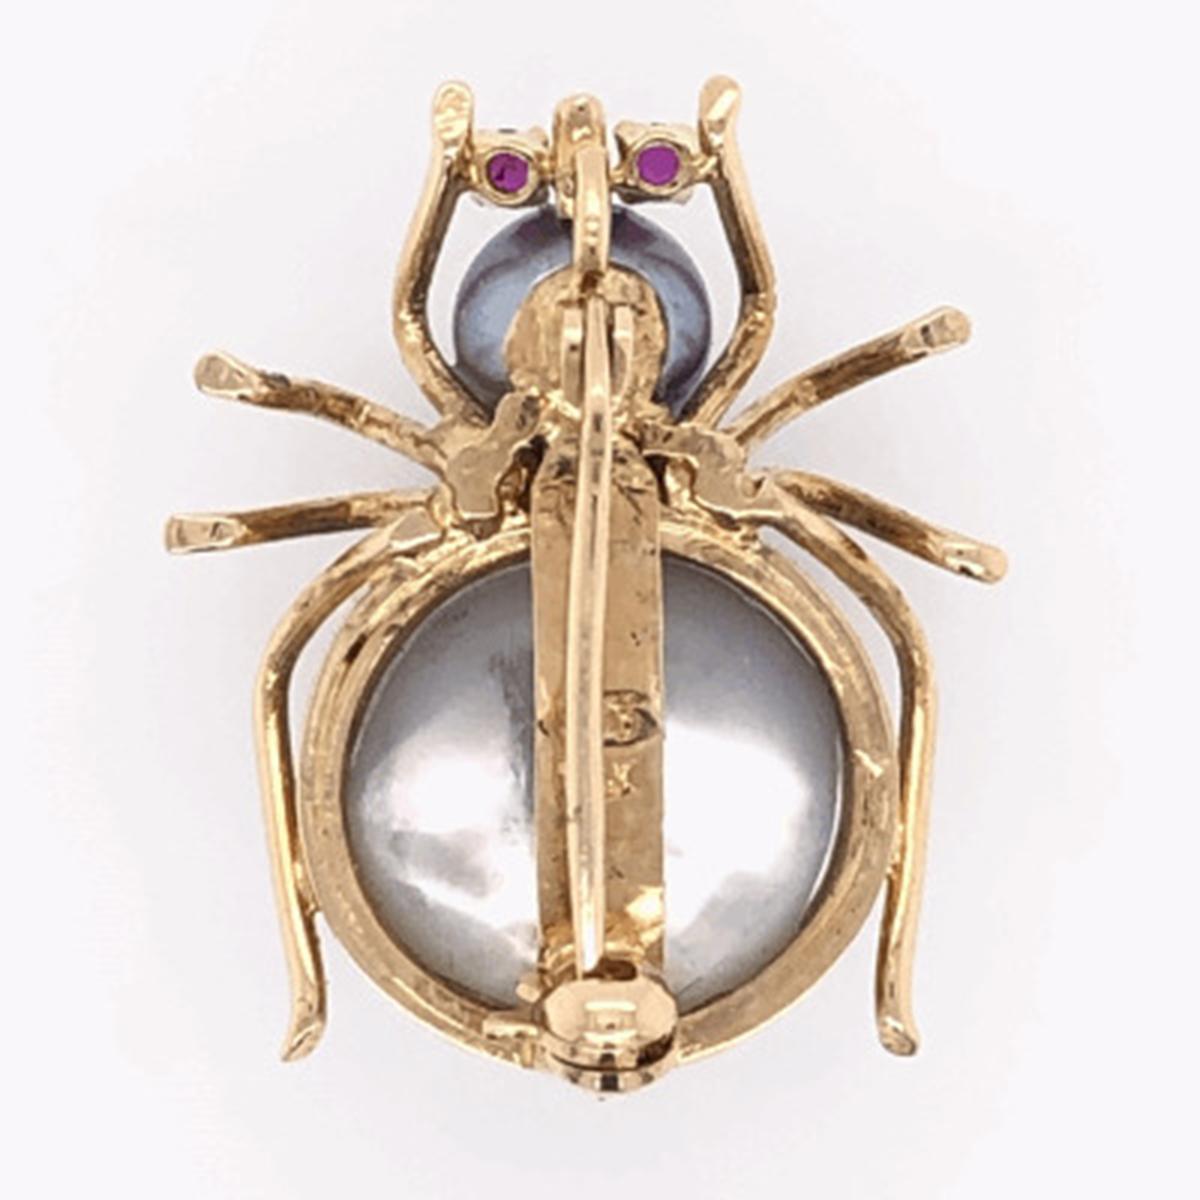 Modernist Vintage Large Pearl & Ruby Gold Spider Brooch Pin Pendant Fine Estate Jewelry